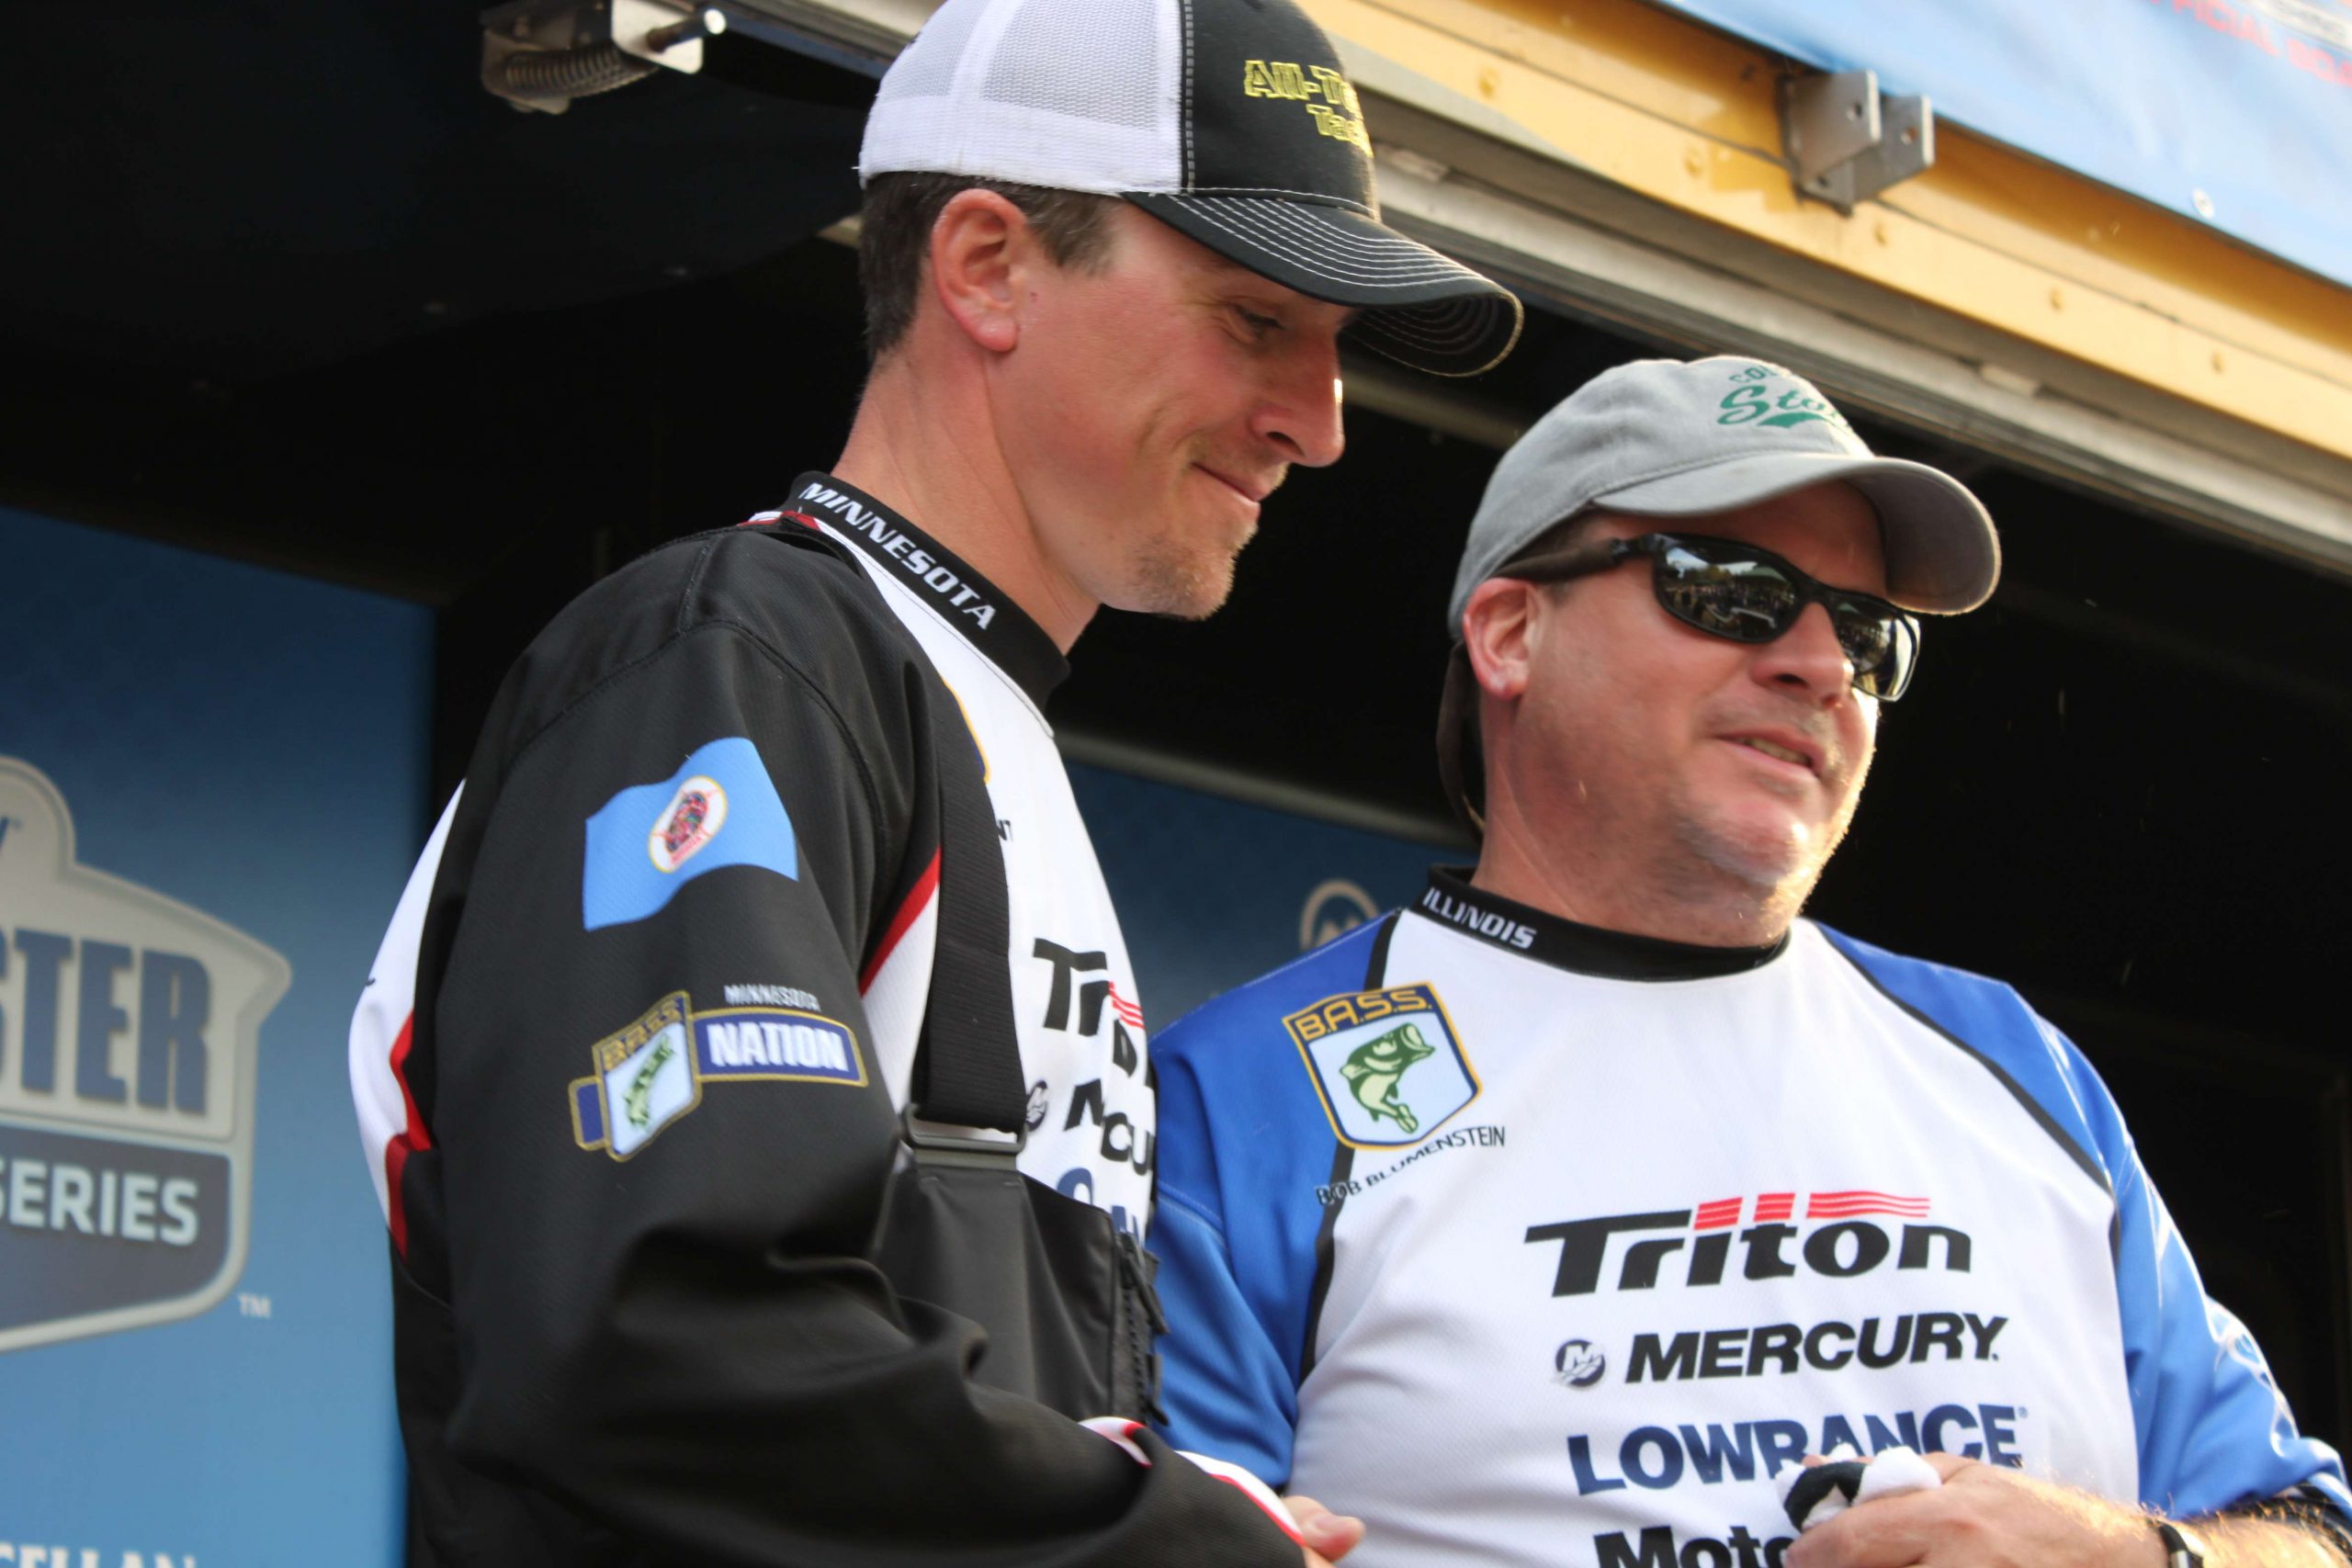 With the non-boater race settled, thereâs only one angler remaining at the scales. Illinois boater Bob Blumenstein, left, seized the lead with a tournament best 25-13 limit on Thursday. Here, heâs taken the stage as both he and Brant anxiously await the results.